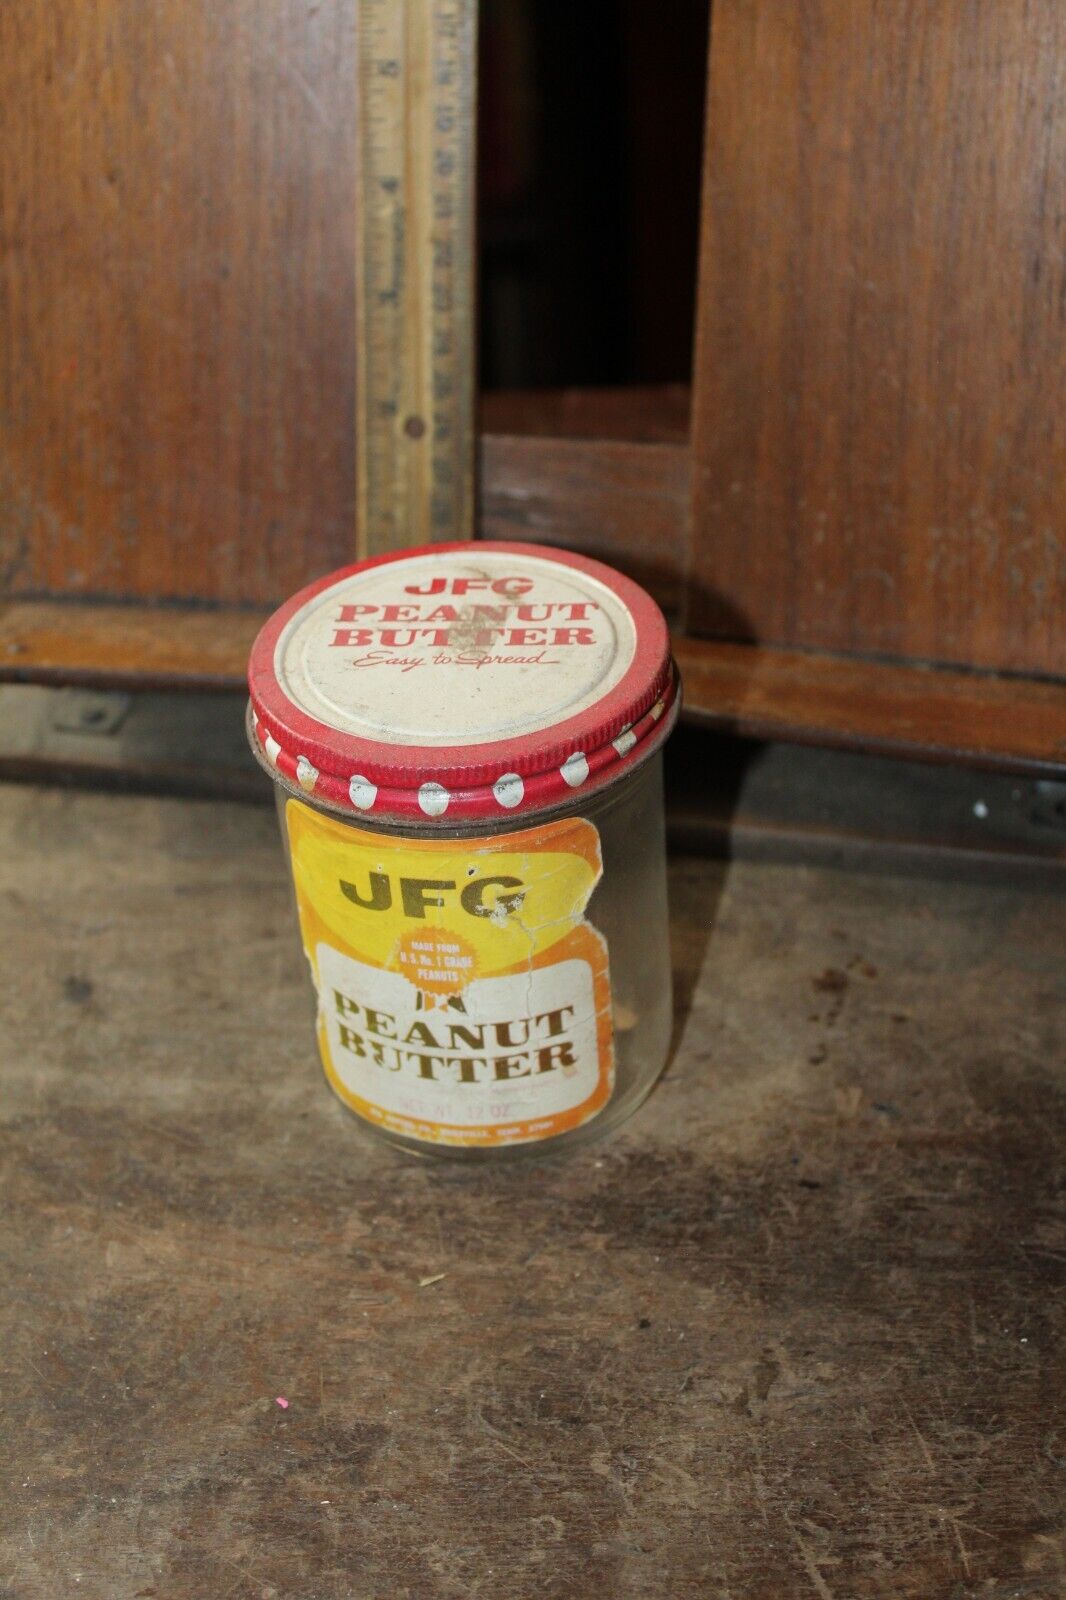 Vintage JFG Peanut Butter Jar with Litho Lid Knoxville Tennessee